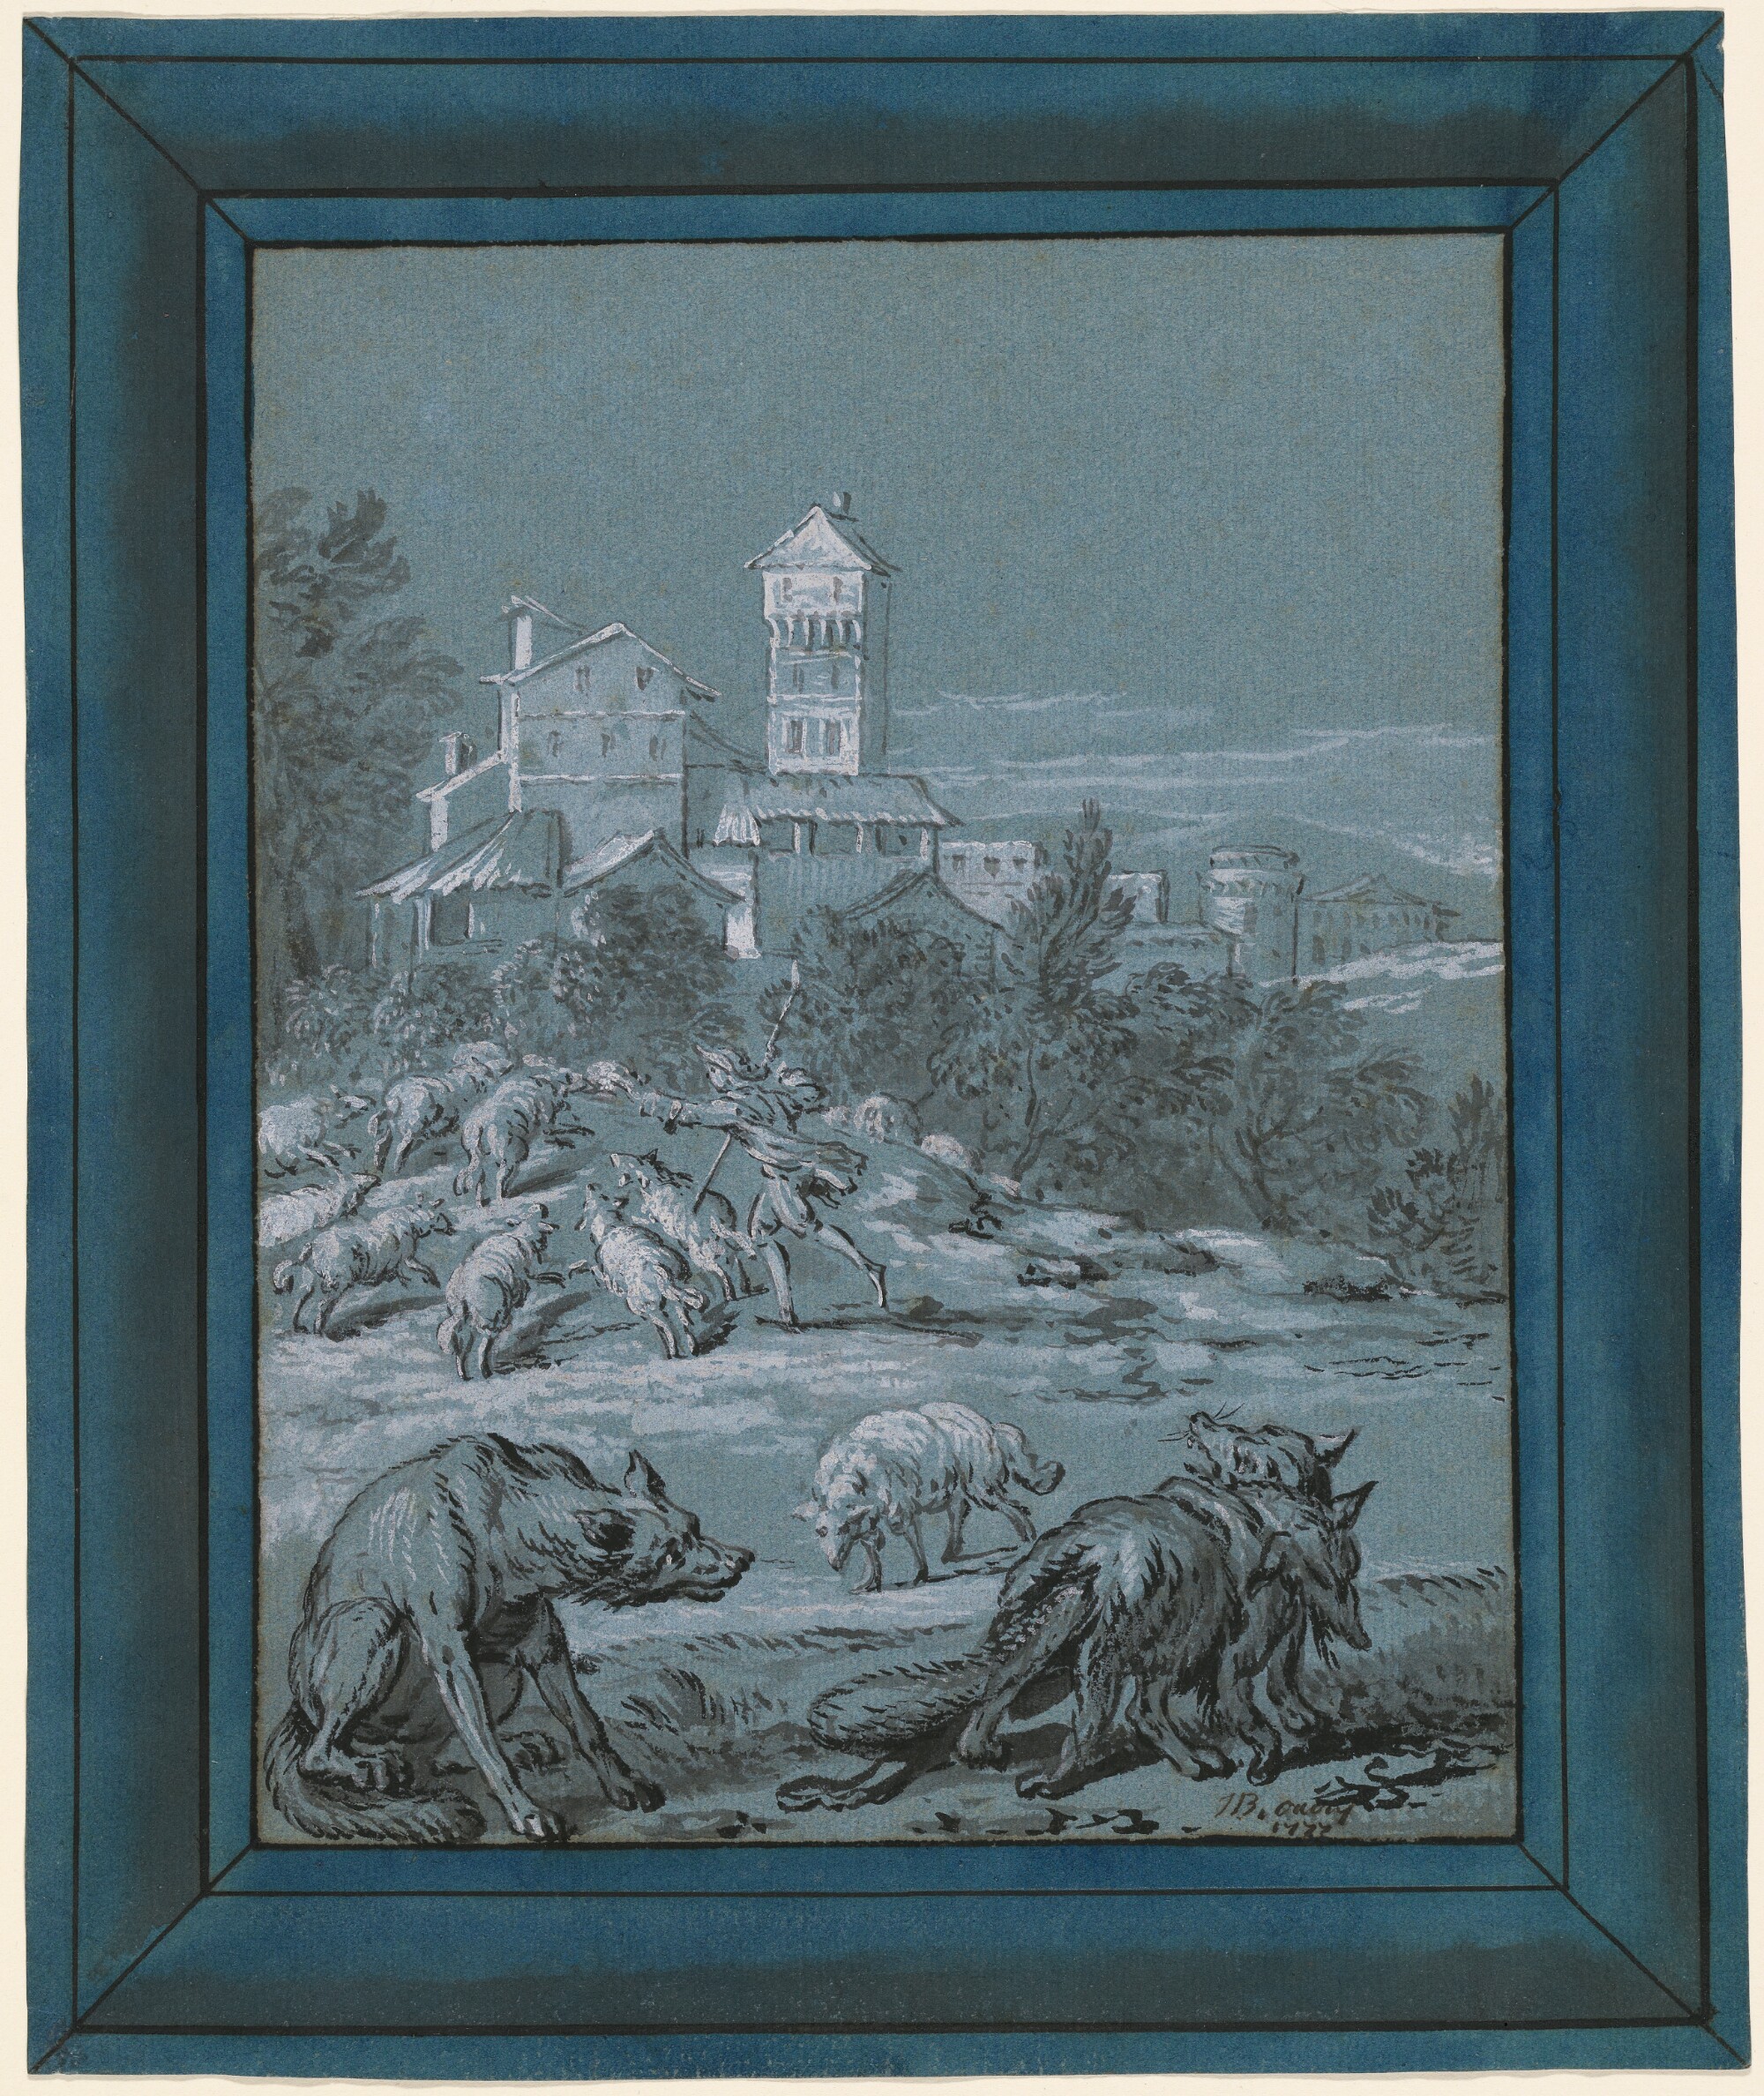 Water color painting on blue paper depicting a robed man herding sheep into a large building away from wolves.